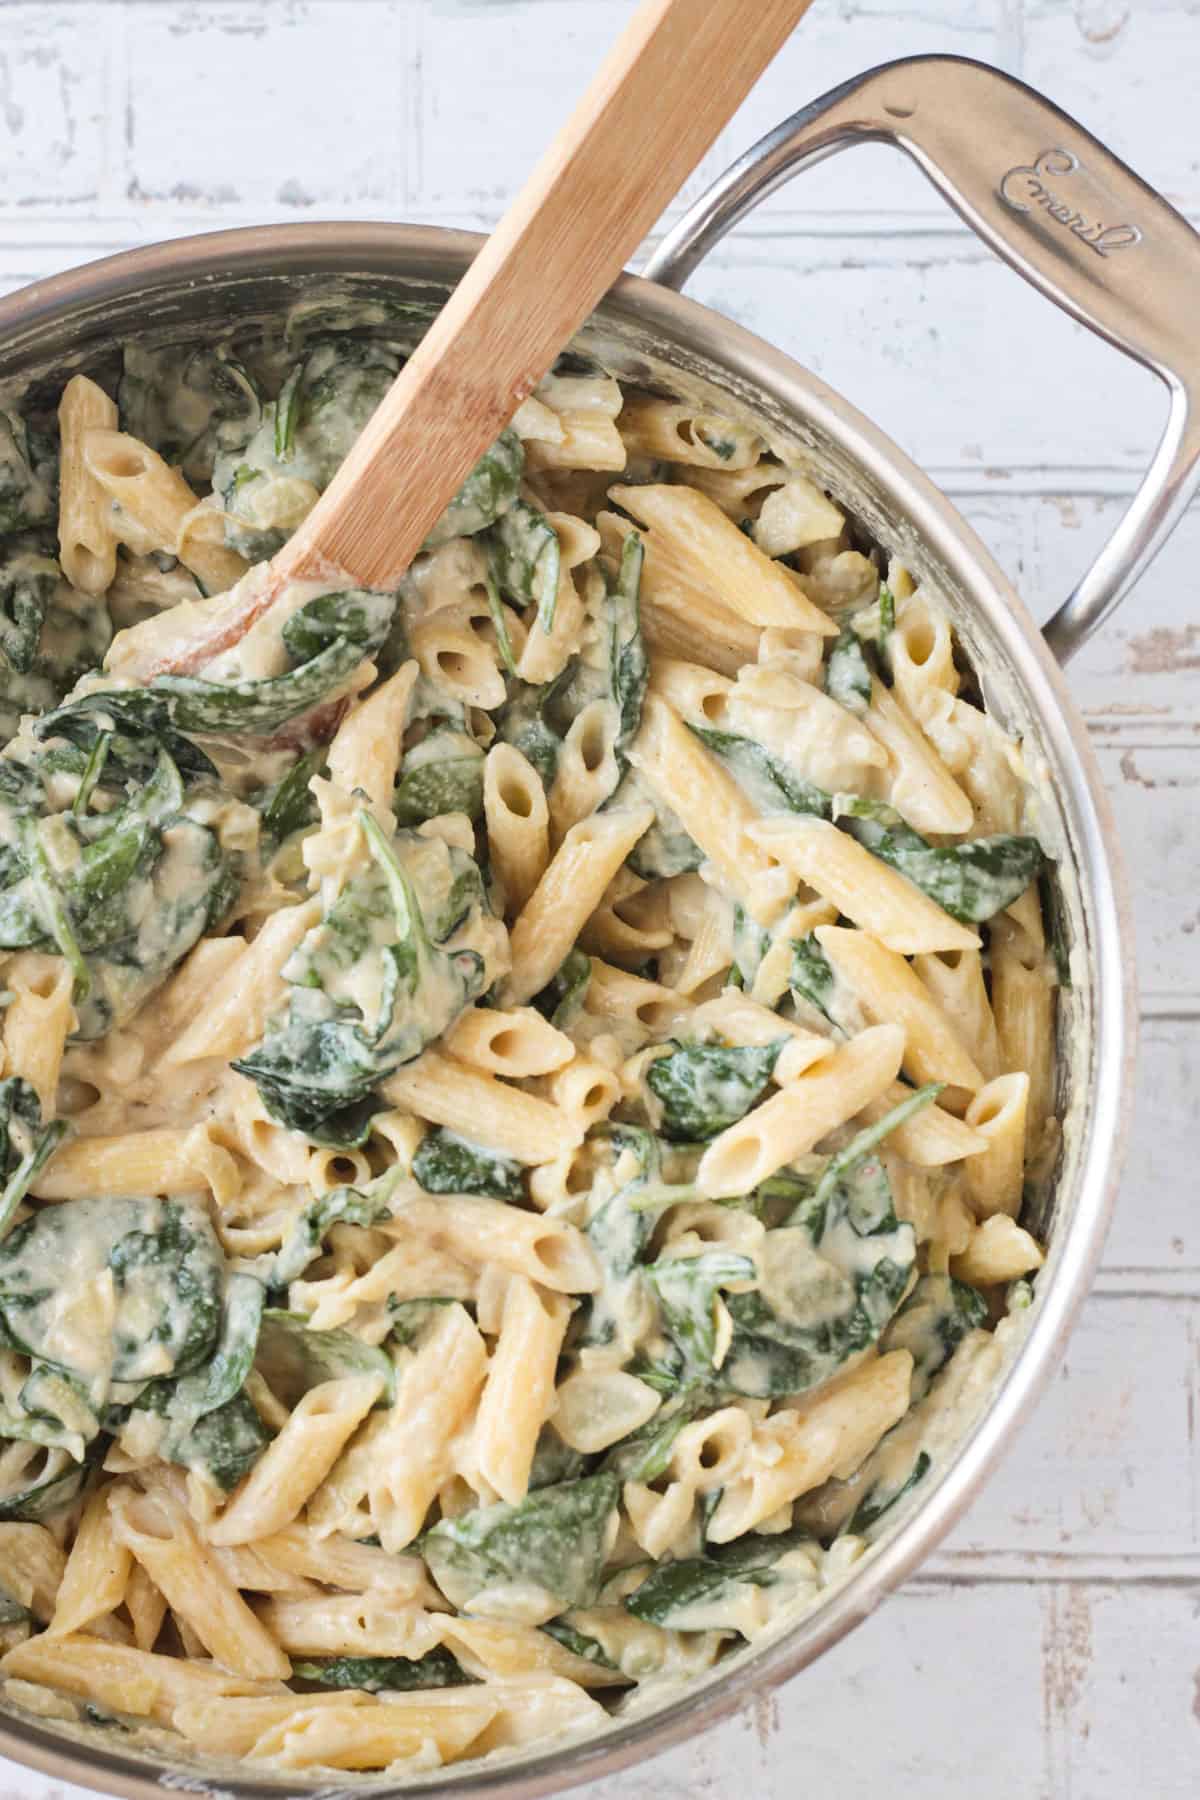 Close up of penne pasta, spinach, and artichokes in a creamy sauce.